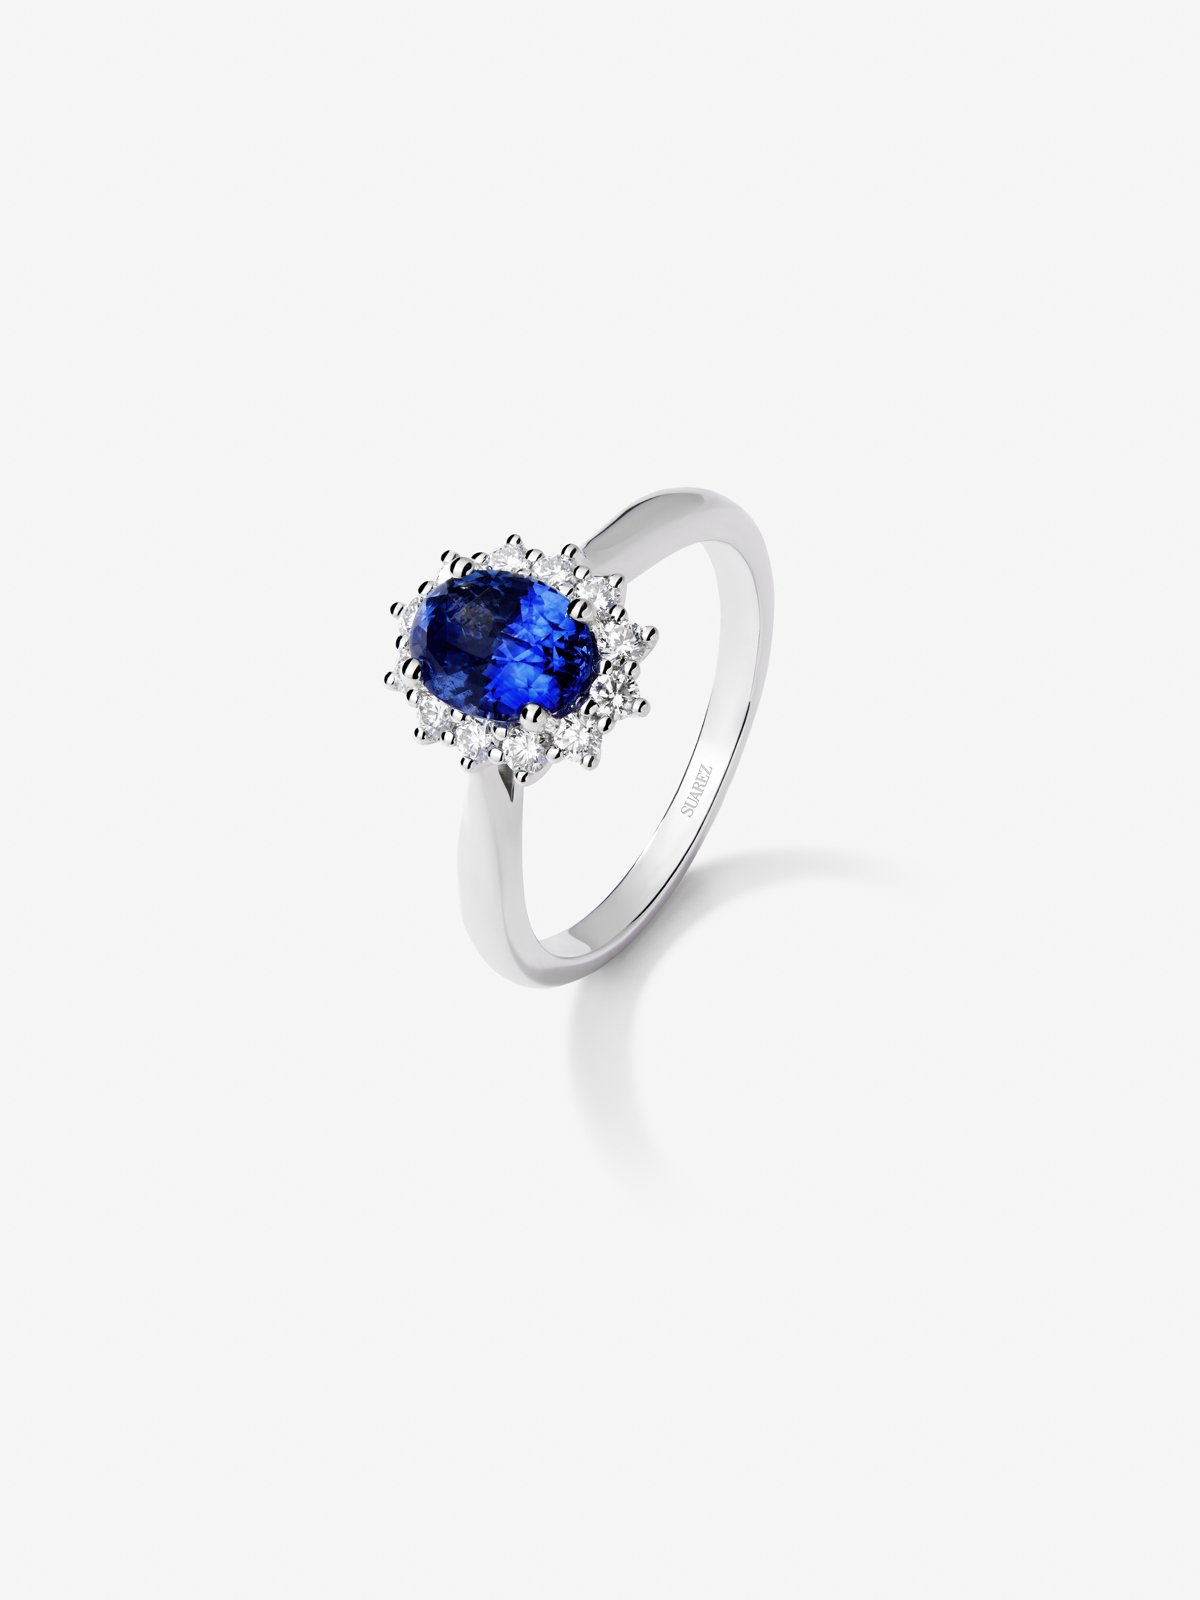 18K White Gold Ring with Azul Blue Sap